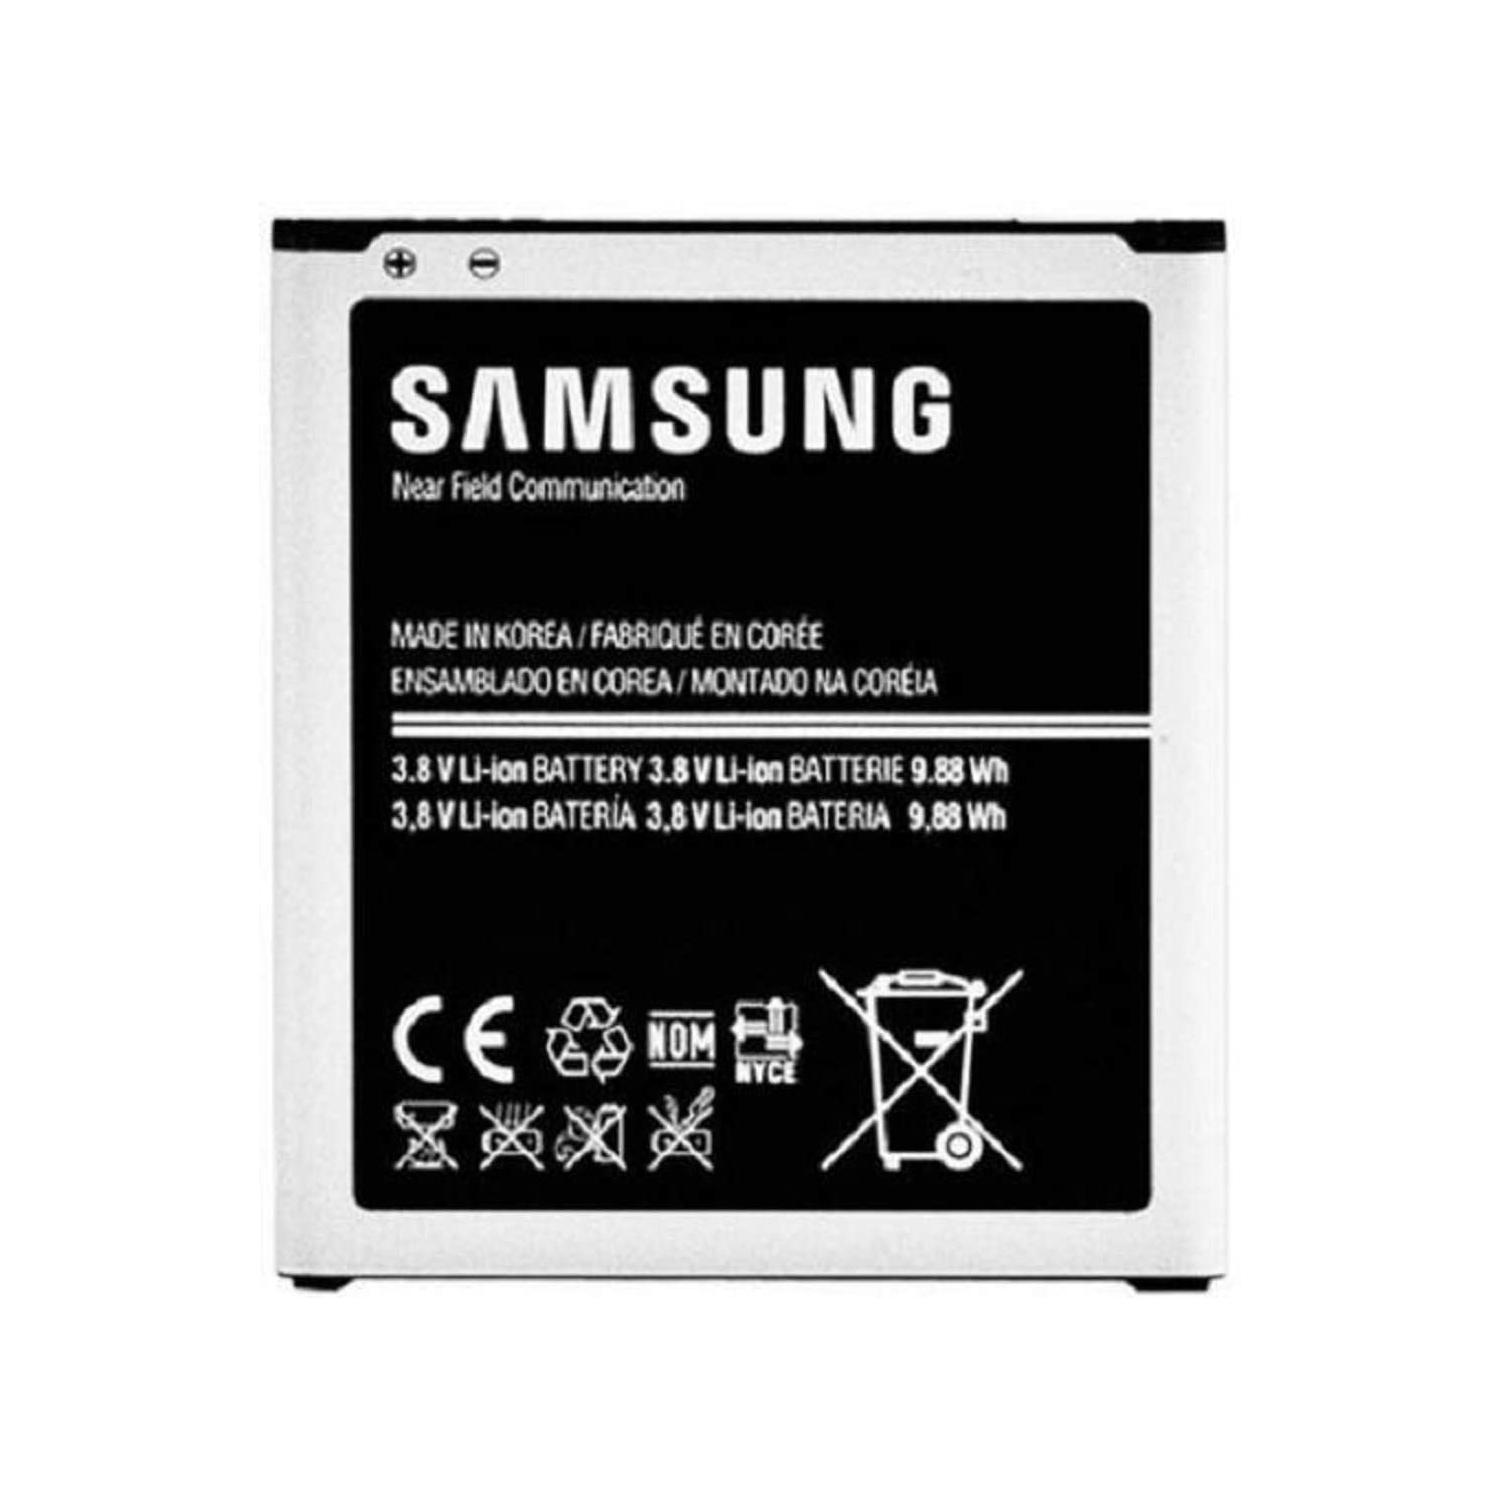 CableShark Premium Replacement 2600 Mah Li-ion Battery for Samsung Galaxy S4 (I9500)